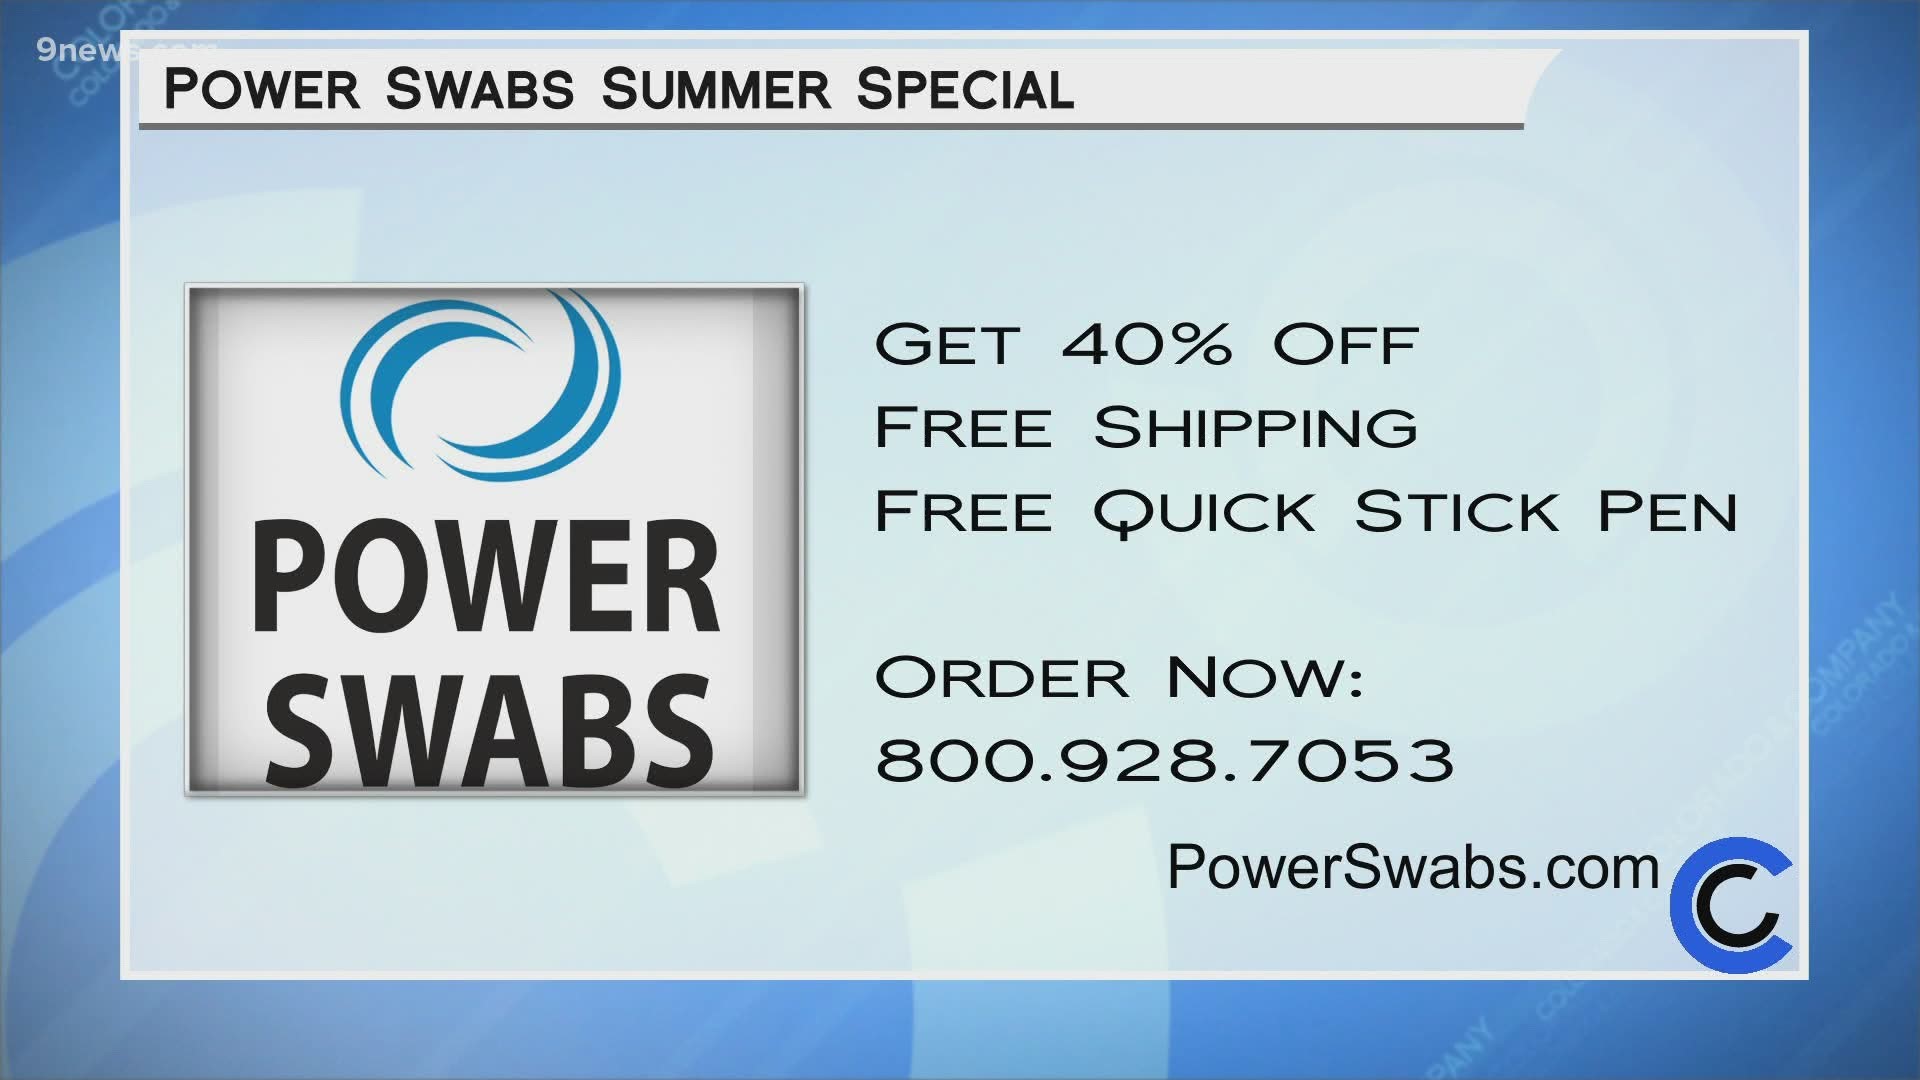 Get 40% off, free shipping AND a free Quick Stick when you order Power Swabs now--800.928.7053 or visit PowerSwabs.com.